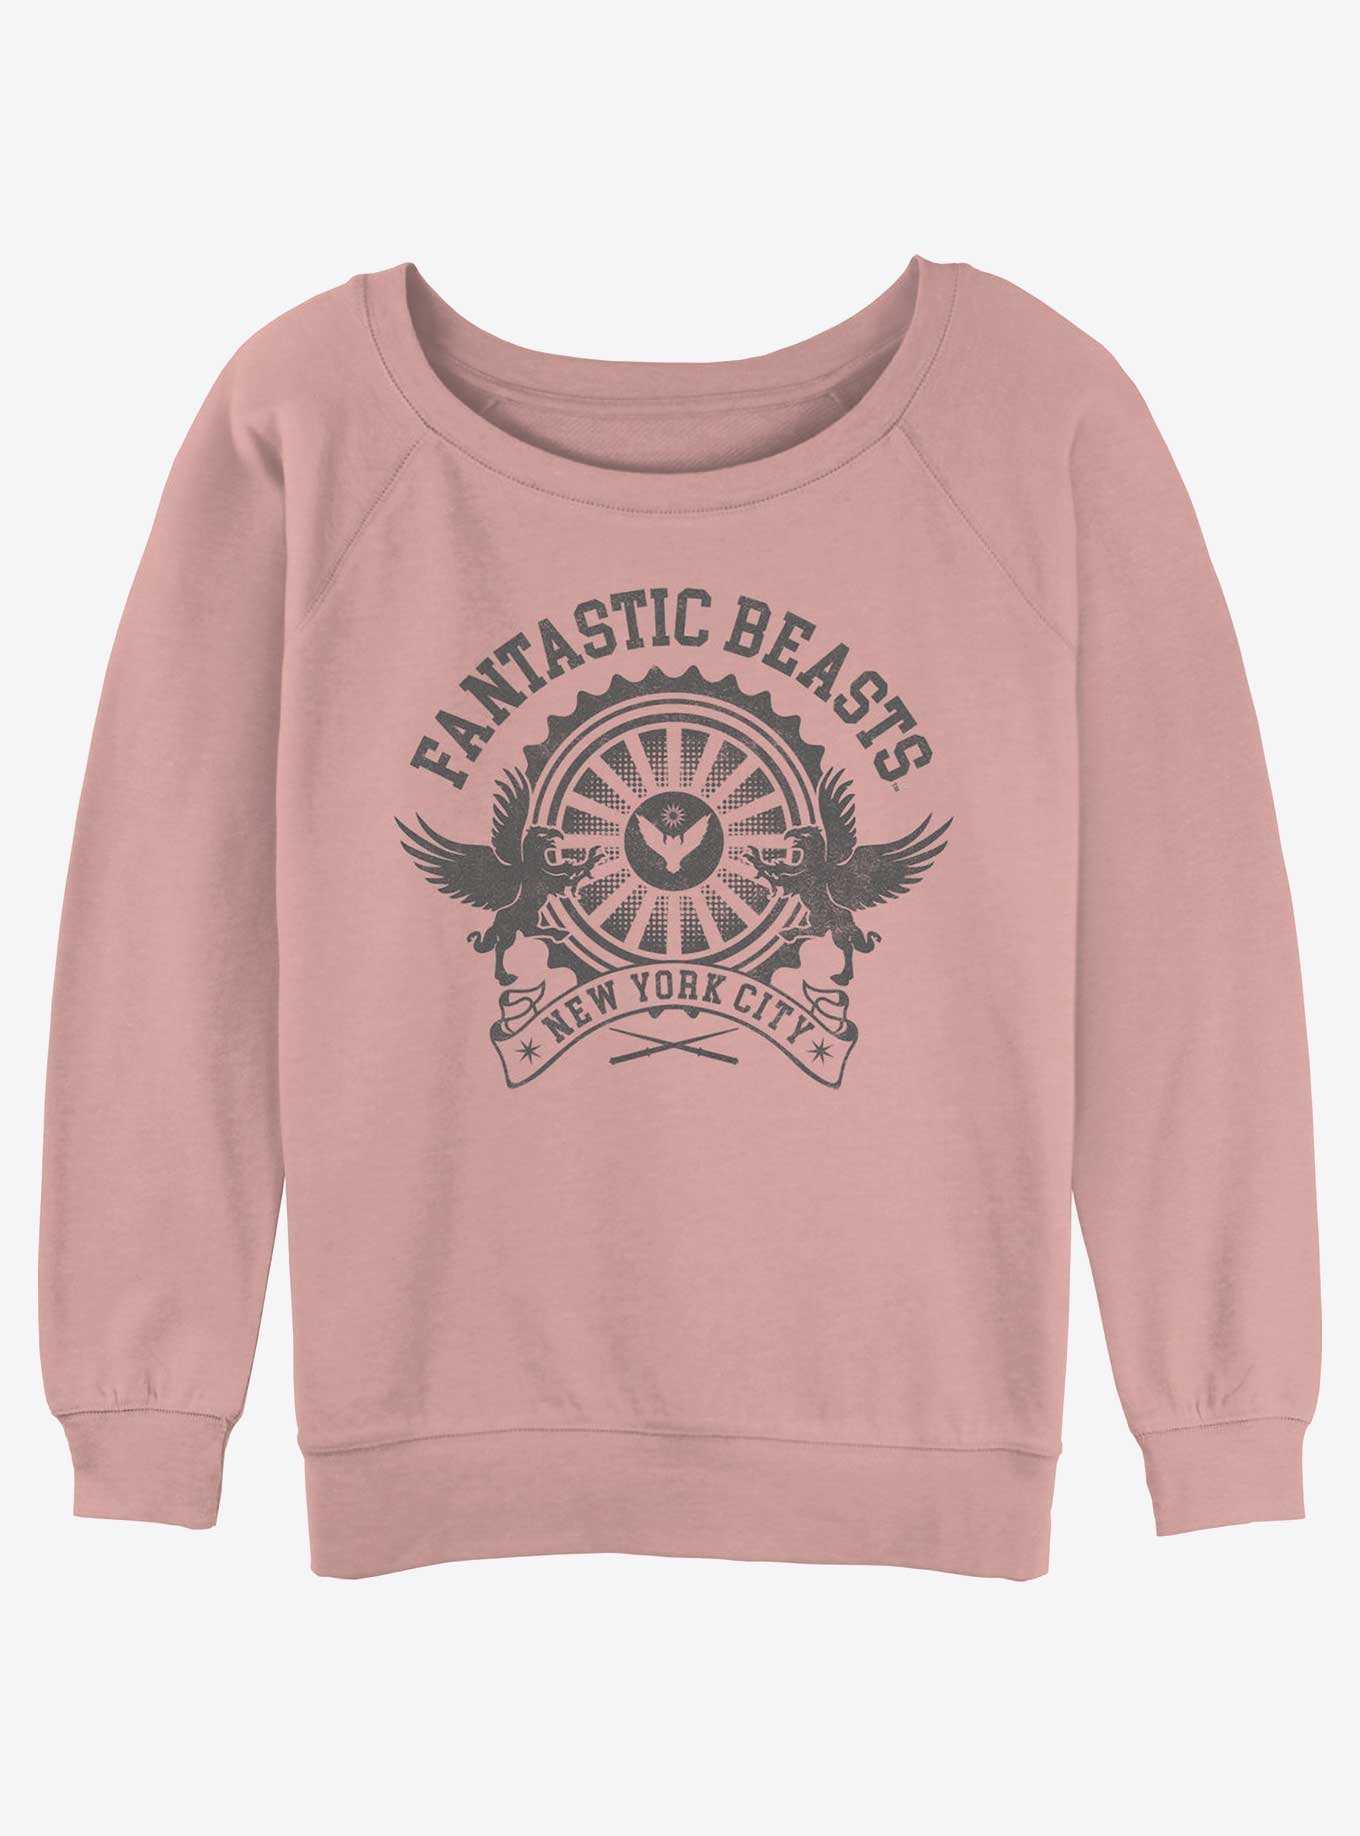 Fantastic Beasts and Where to Find Them Fantastic Crest Girls Slouchy Sweatshirt, , hi-res